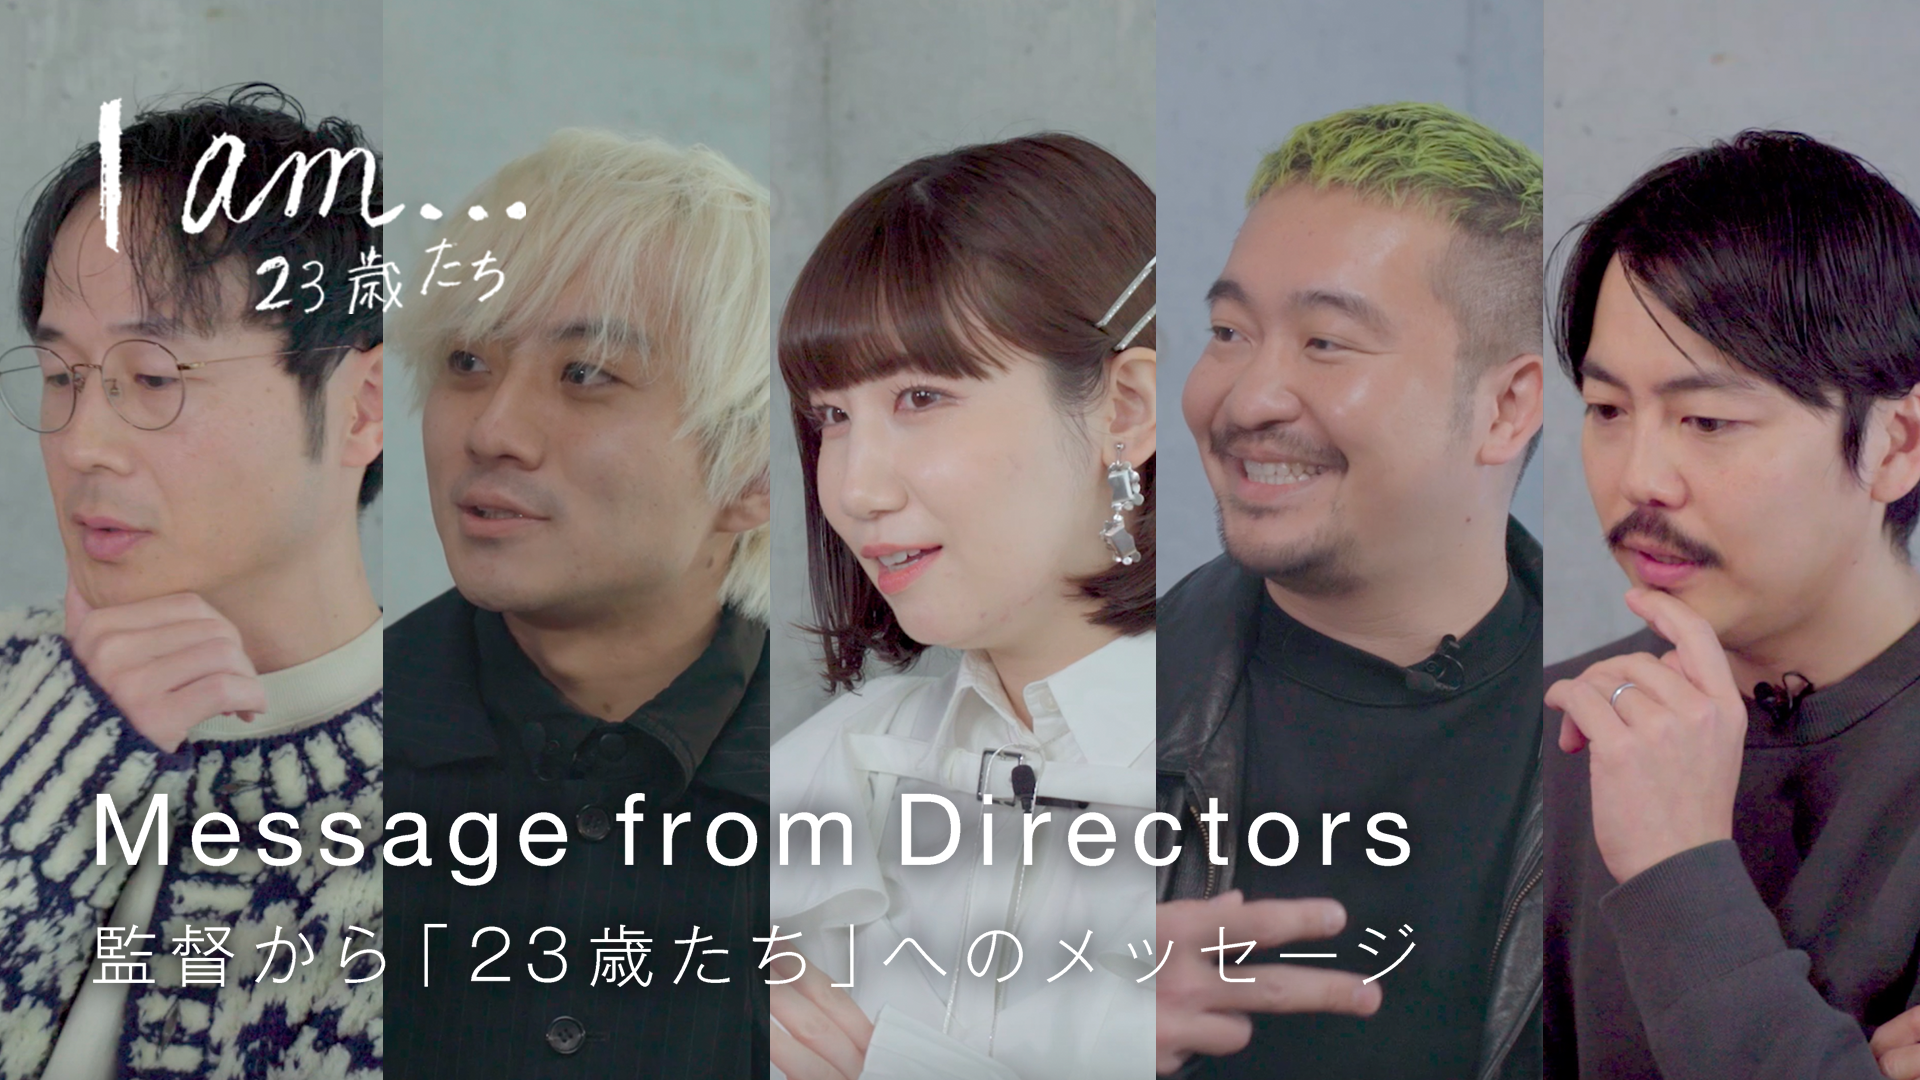 FOD original omnibus drama “I am… 23-year-olds” has been decided to be broadcasted on terrestrial TV! Also, from today, interview videos by five directors will be distributed.